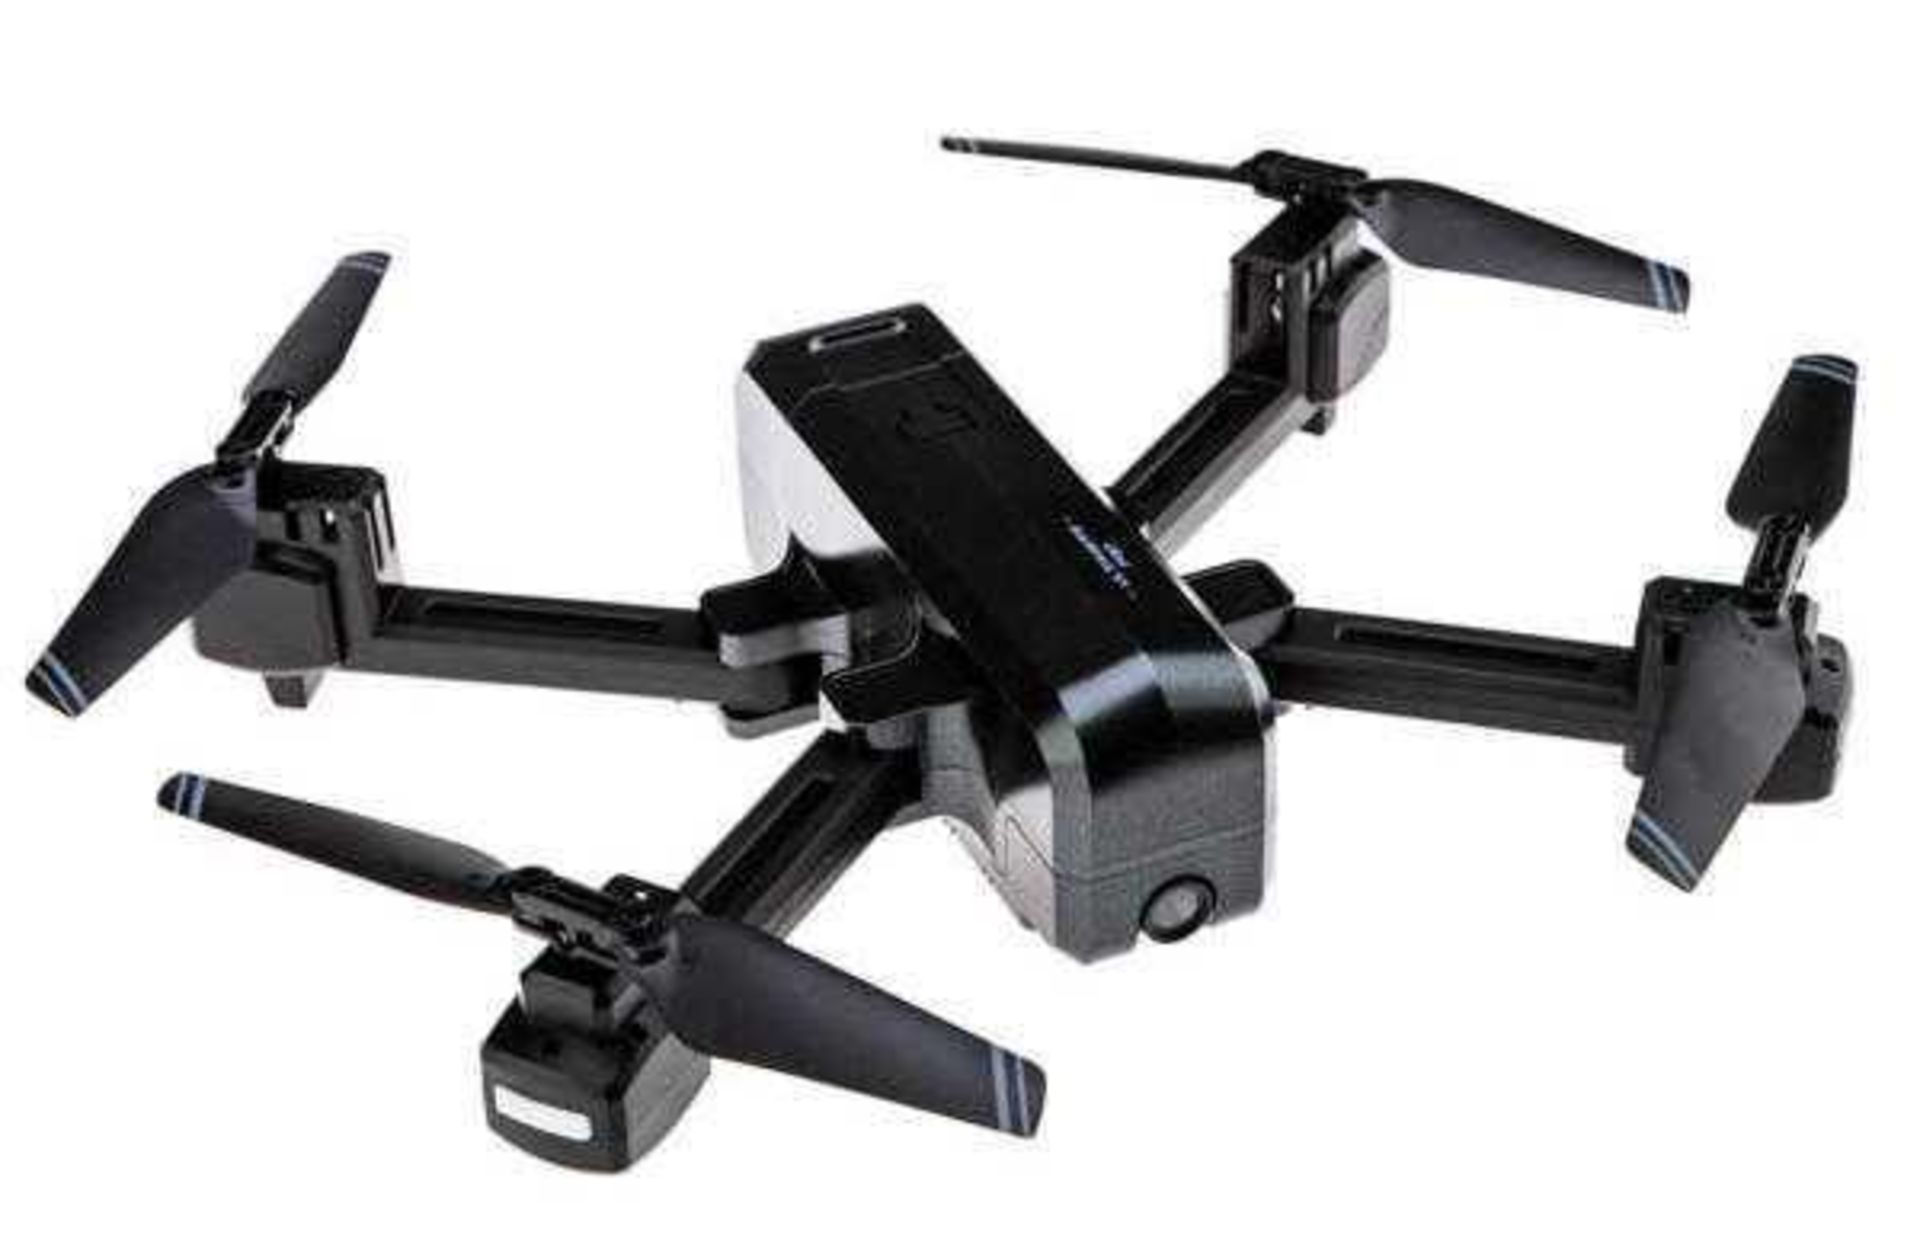 Rrp £100 Each Boxed Ultimate Pro High-Performance Rc Hd Folding Drone